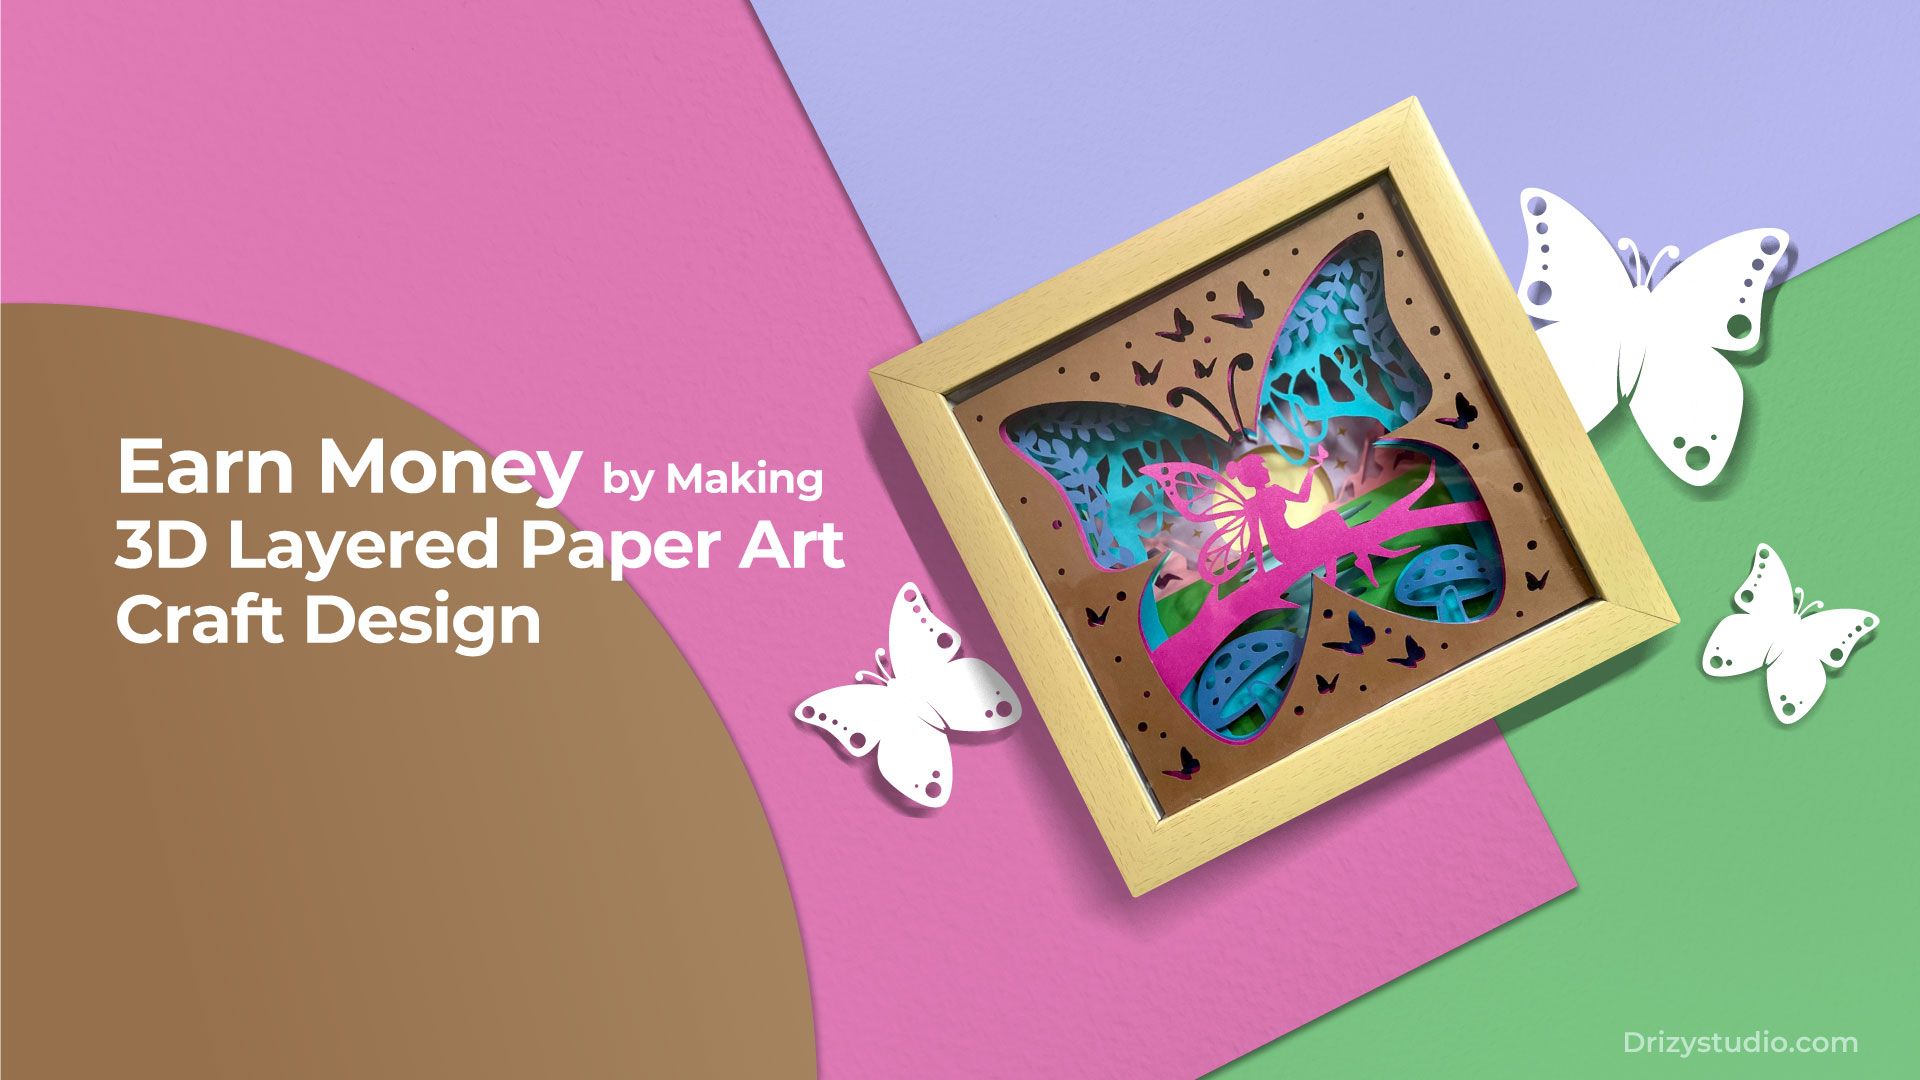 Earn Money by Making Beautiful 3D Layered Paper Art Craft Design